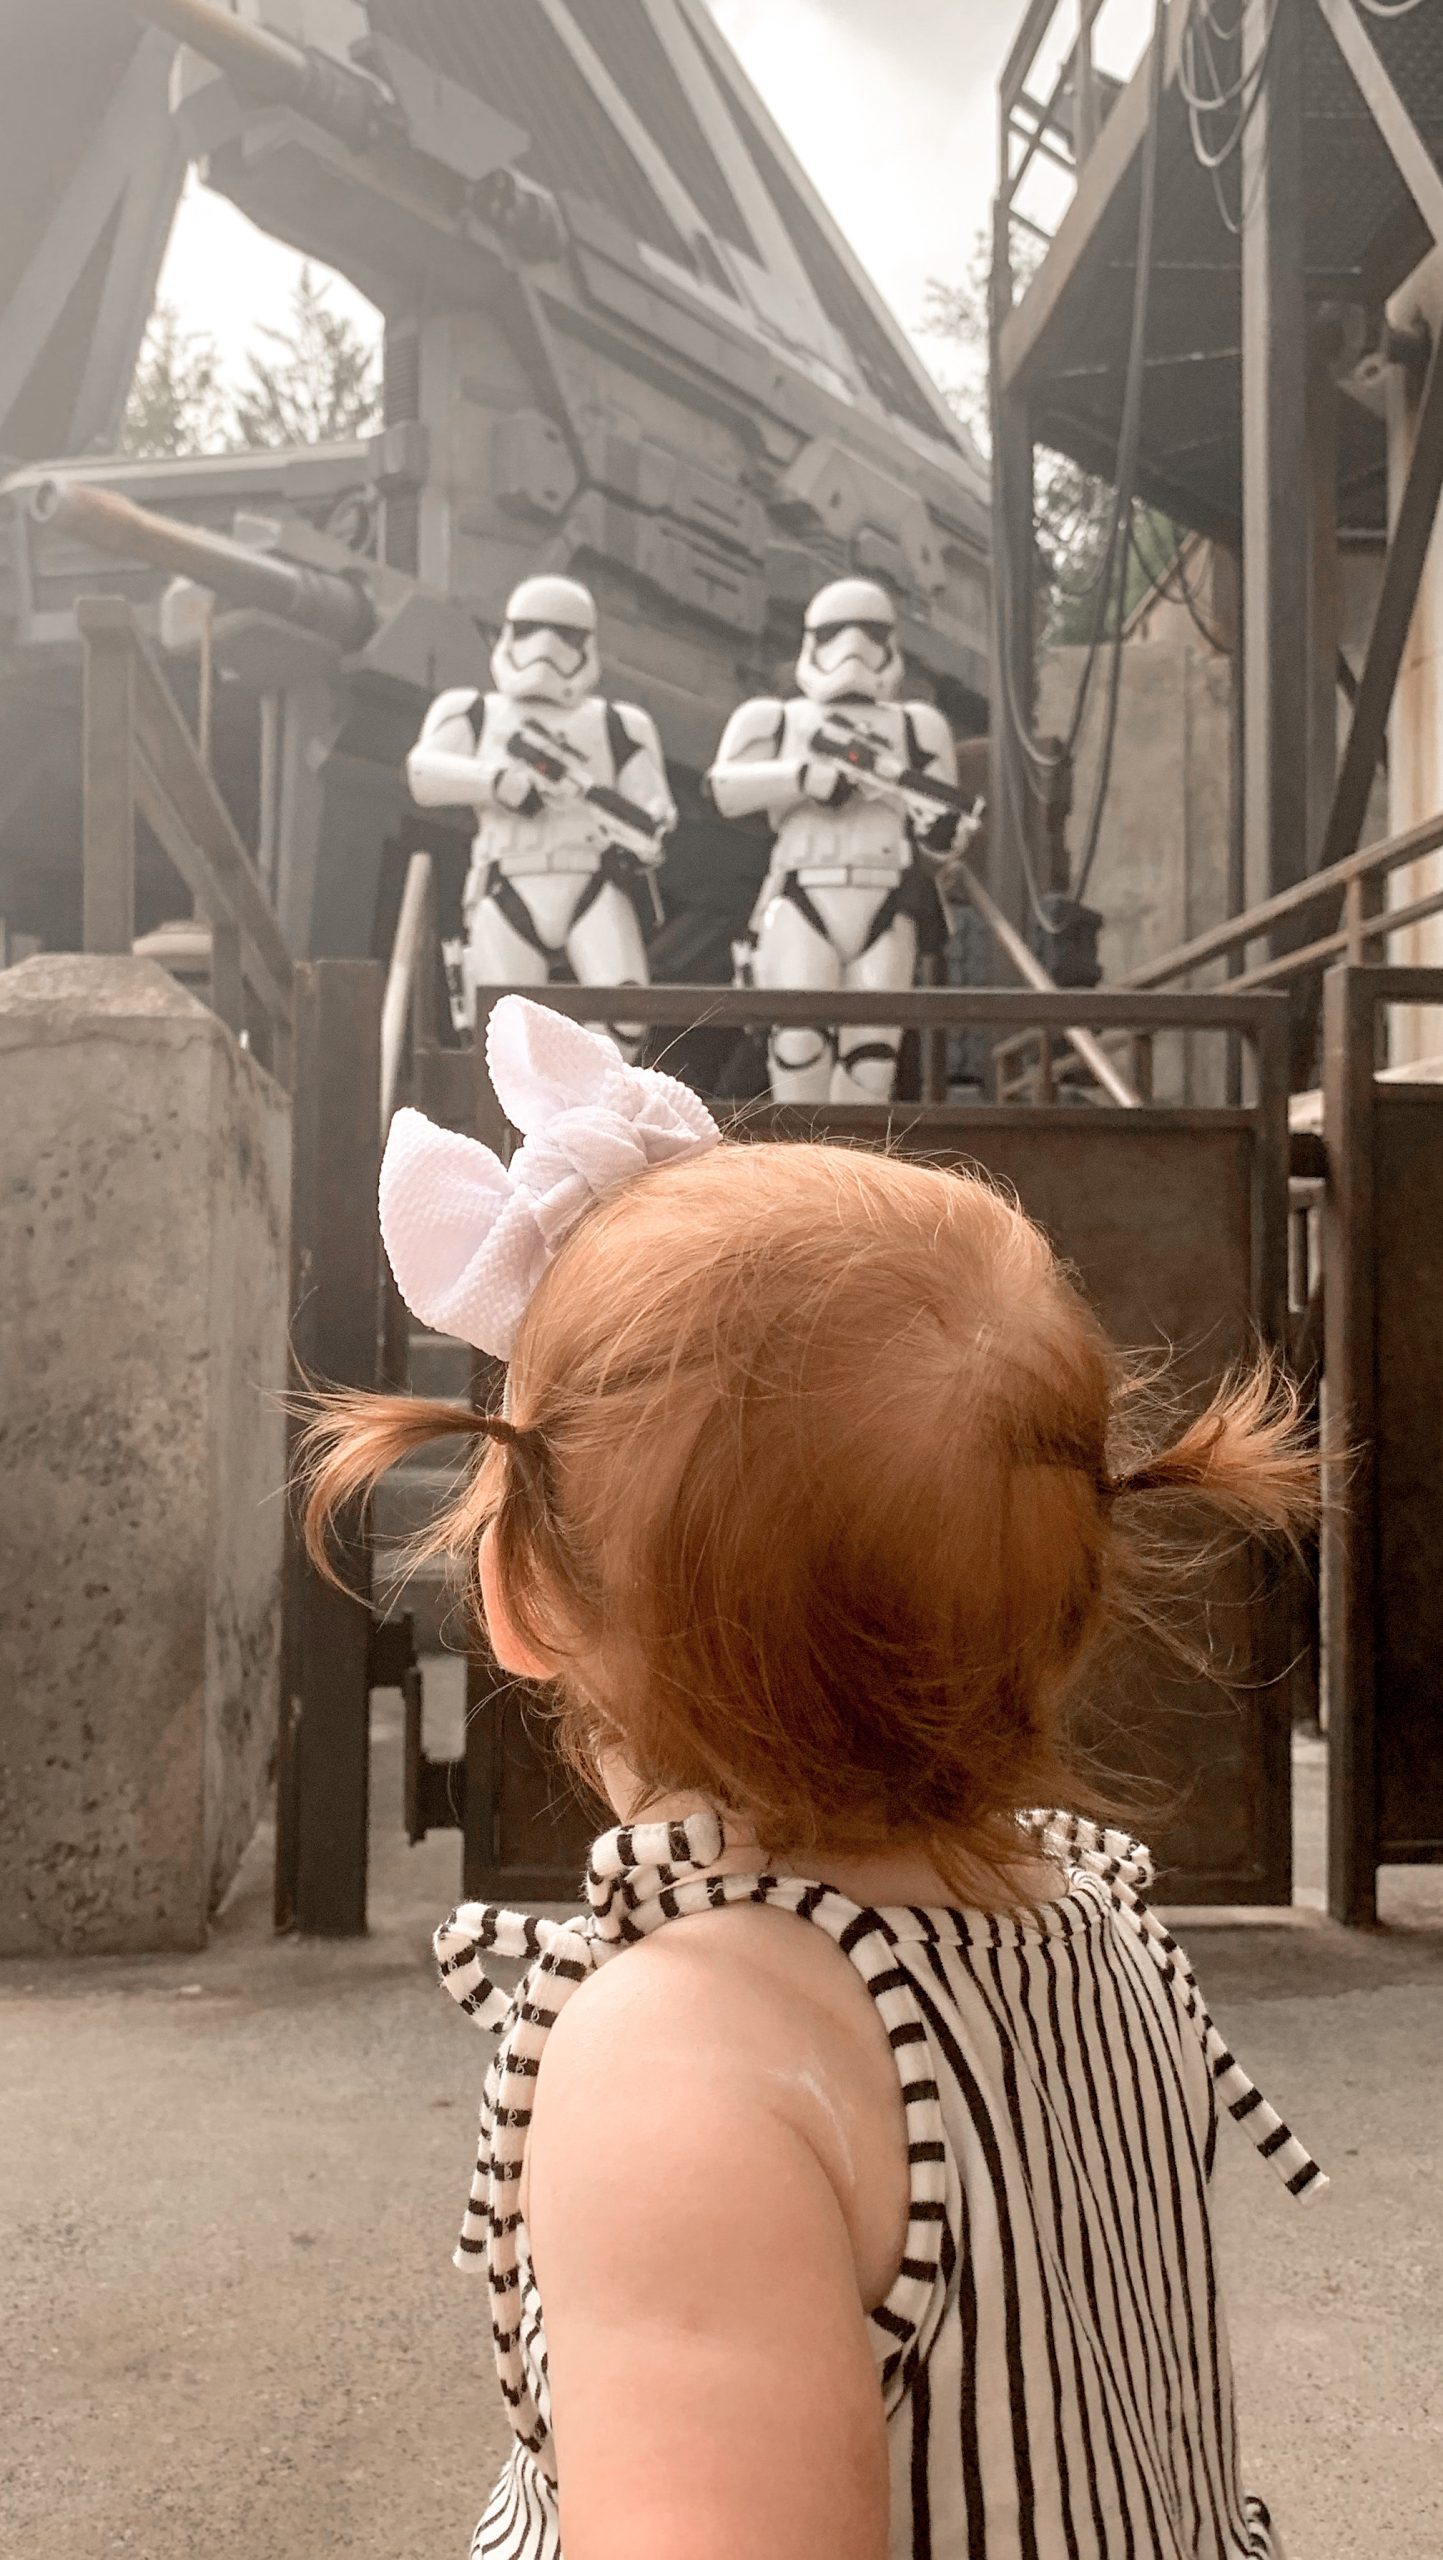 back of a little girl's head with pigtails and a bow looking at two stormtroopers behind a gate